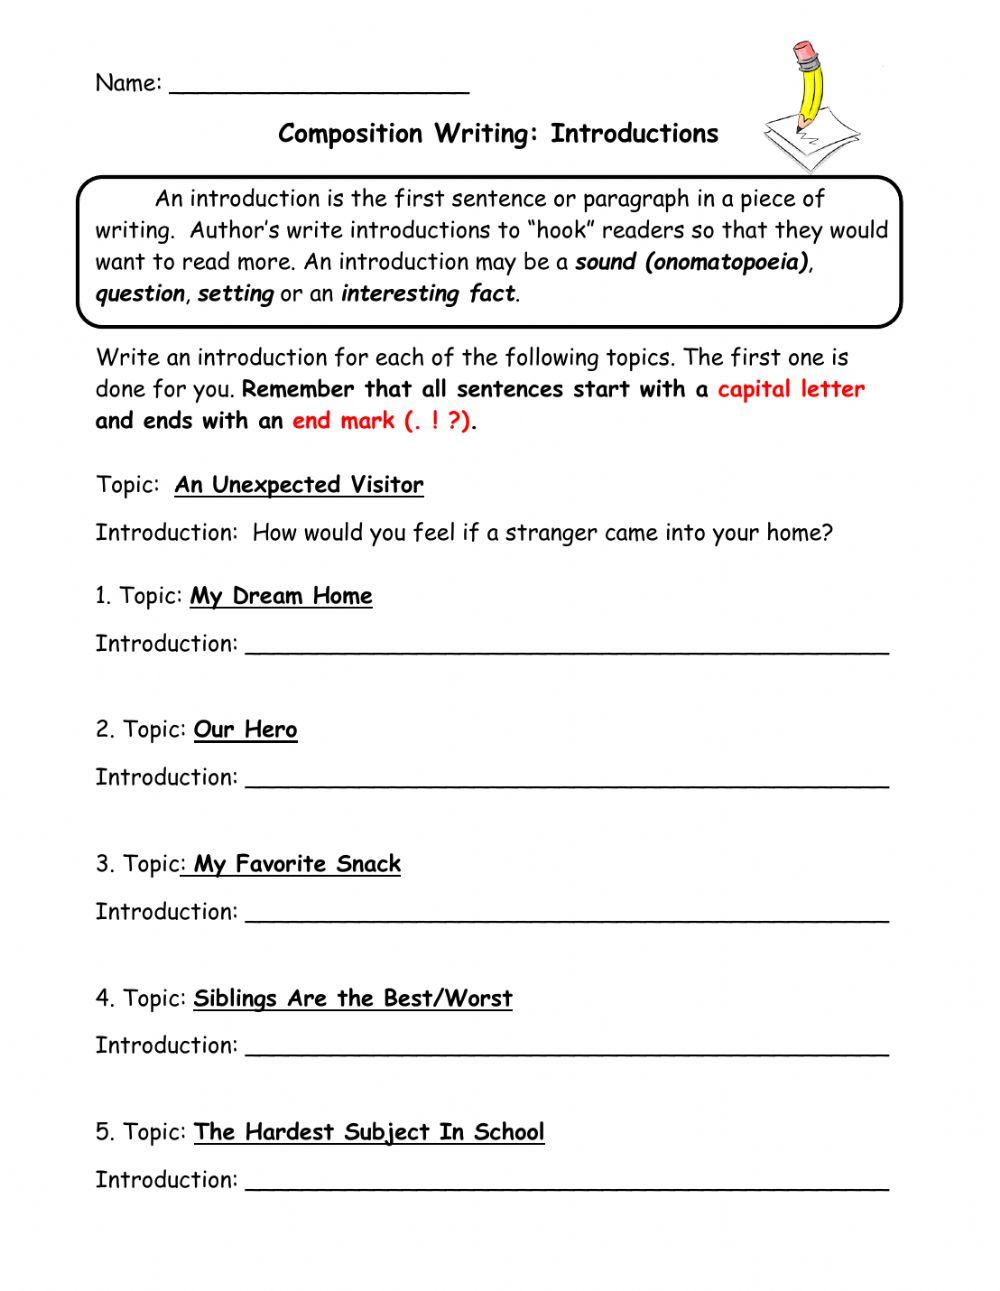 How To Write An Introduction Paragraph For An Argumentative Essay